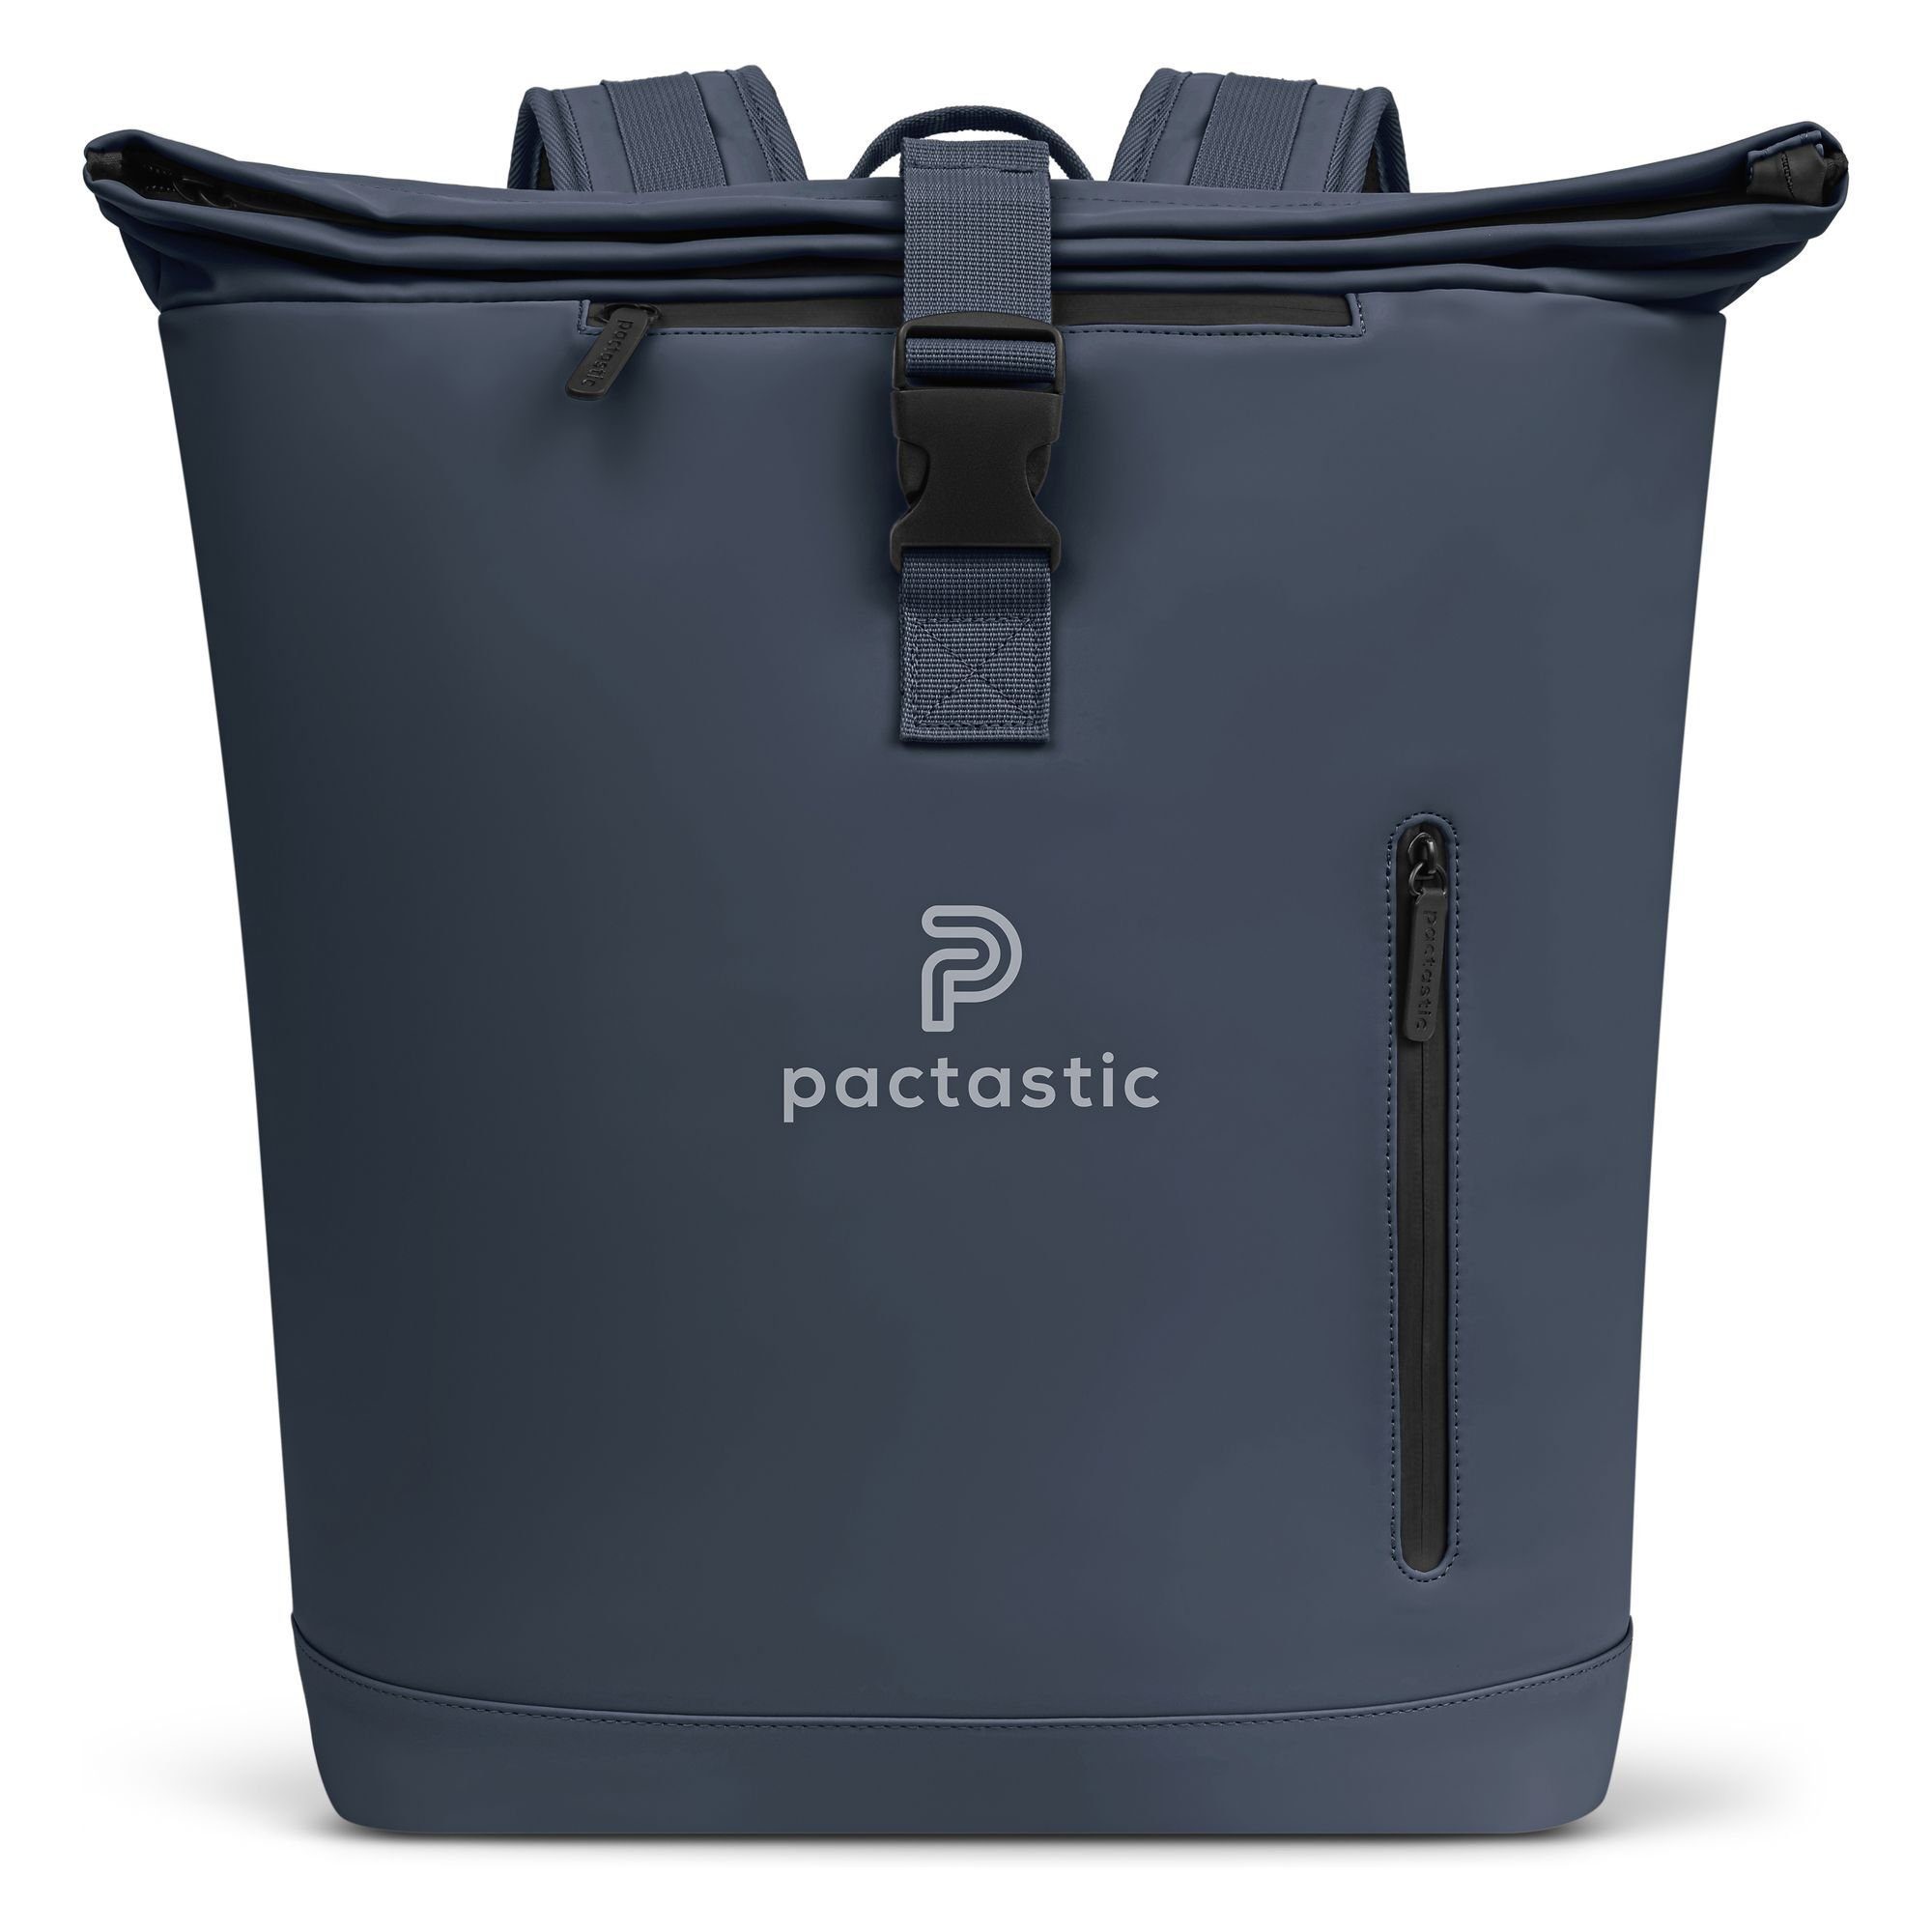 Pactastic blue Veganes Urban dark Tech-Material Daypack Collection,